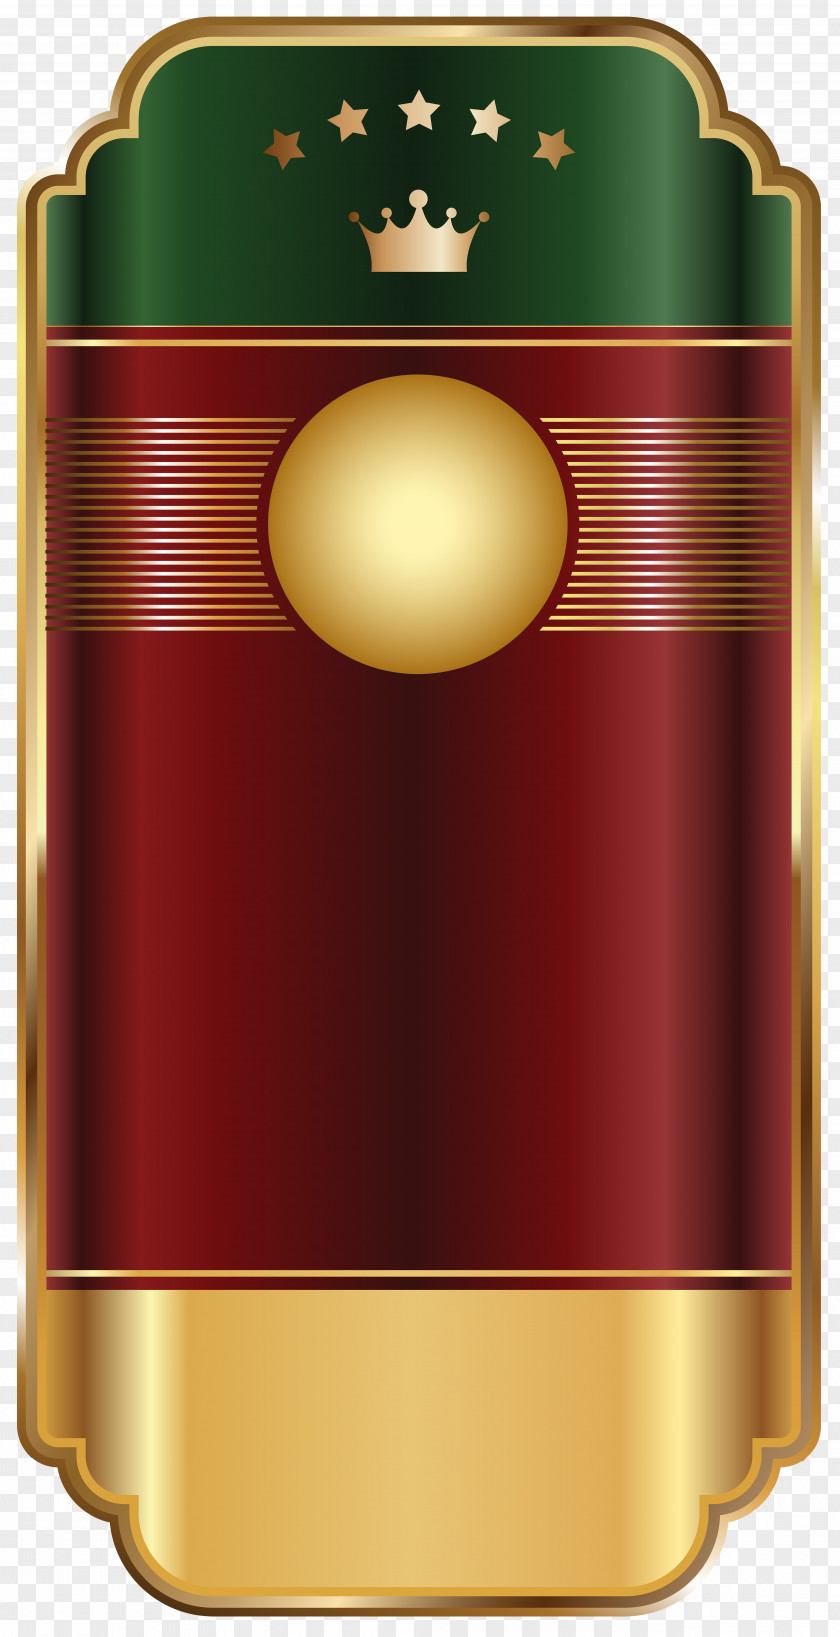 Gold Red Label Template Transparent Clip Art Image PNG